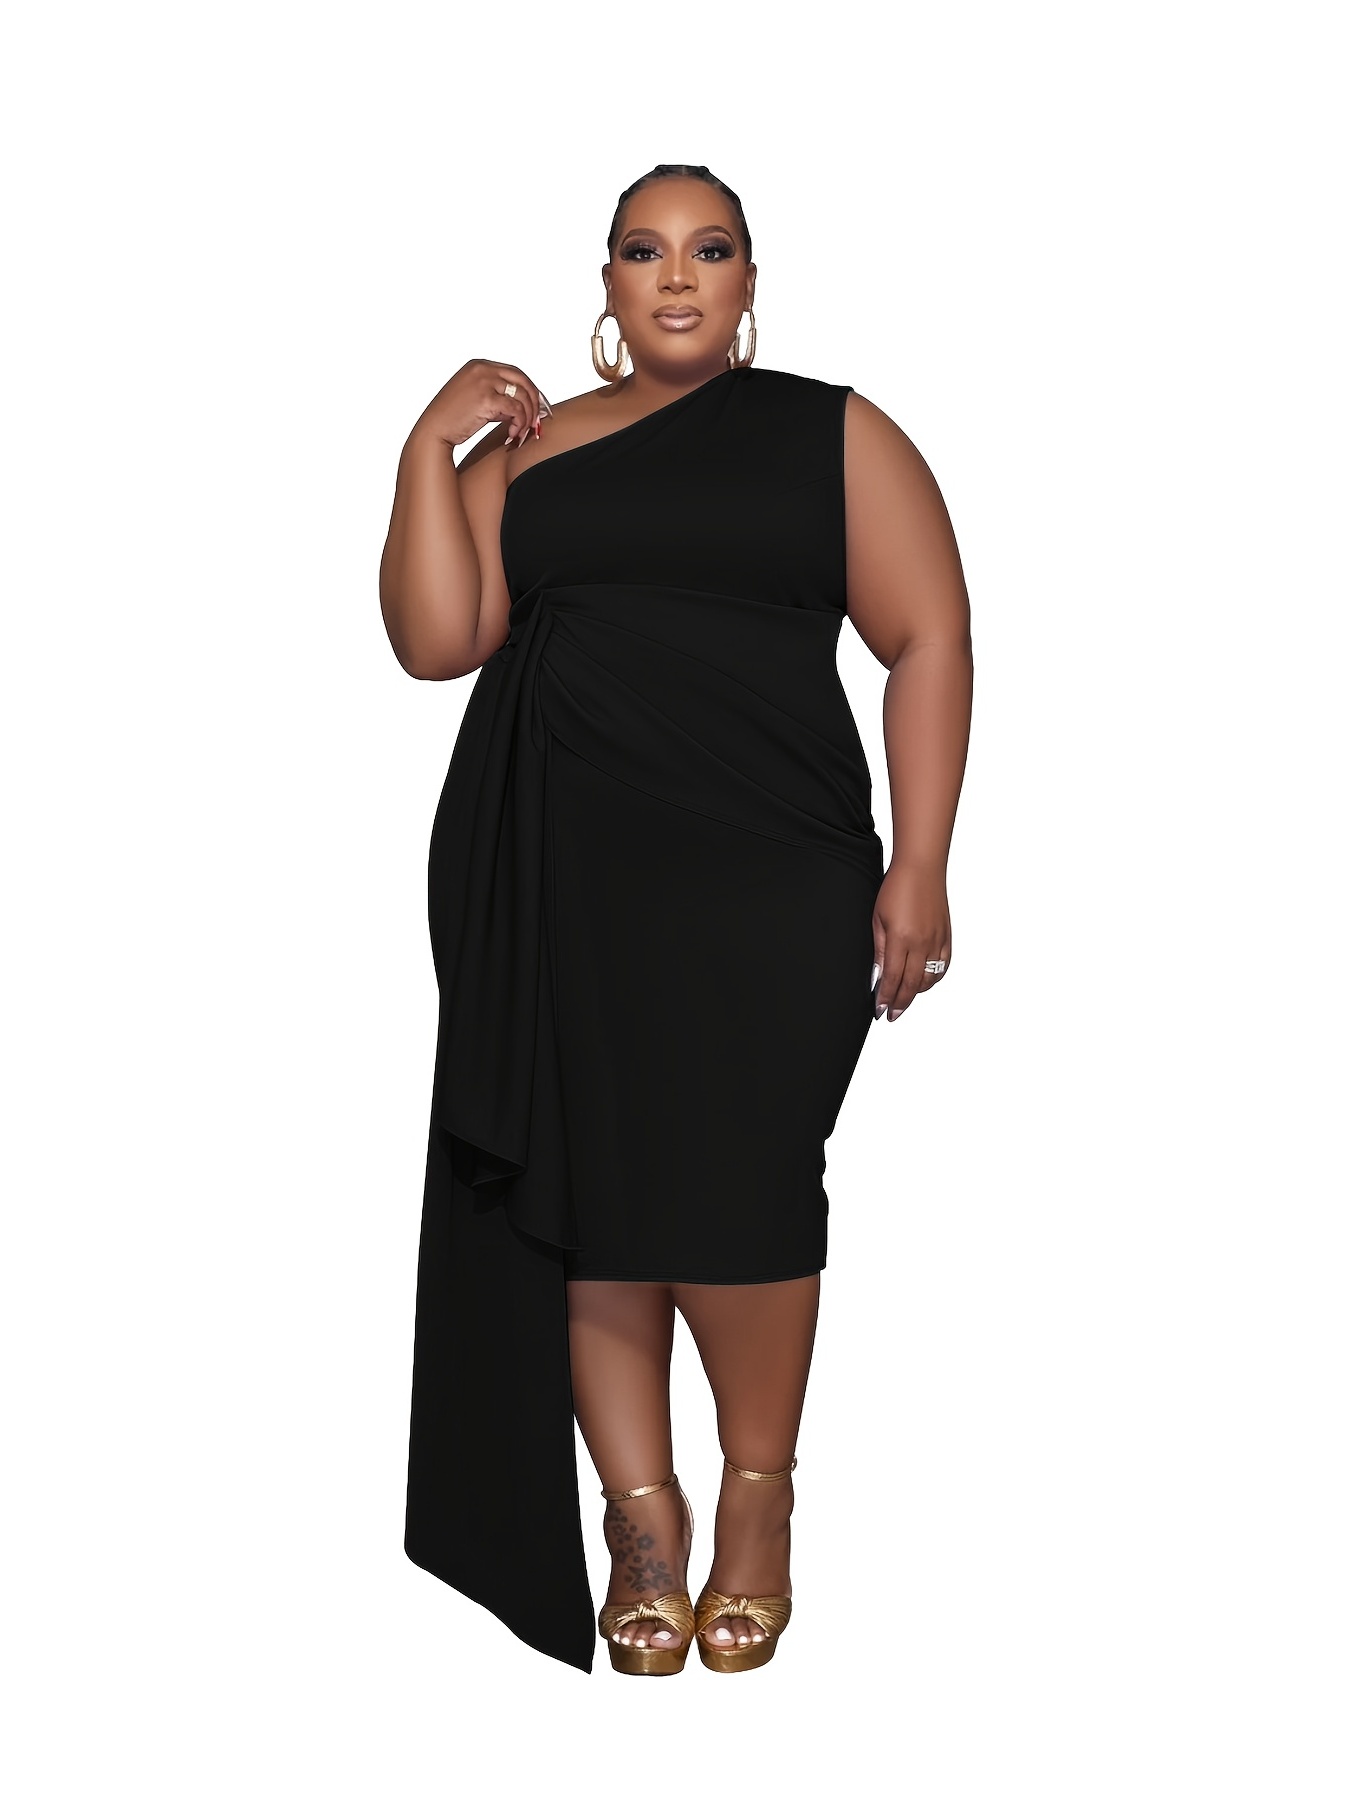 Plus and Mid Size Dresses For Women